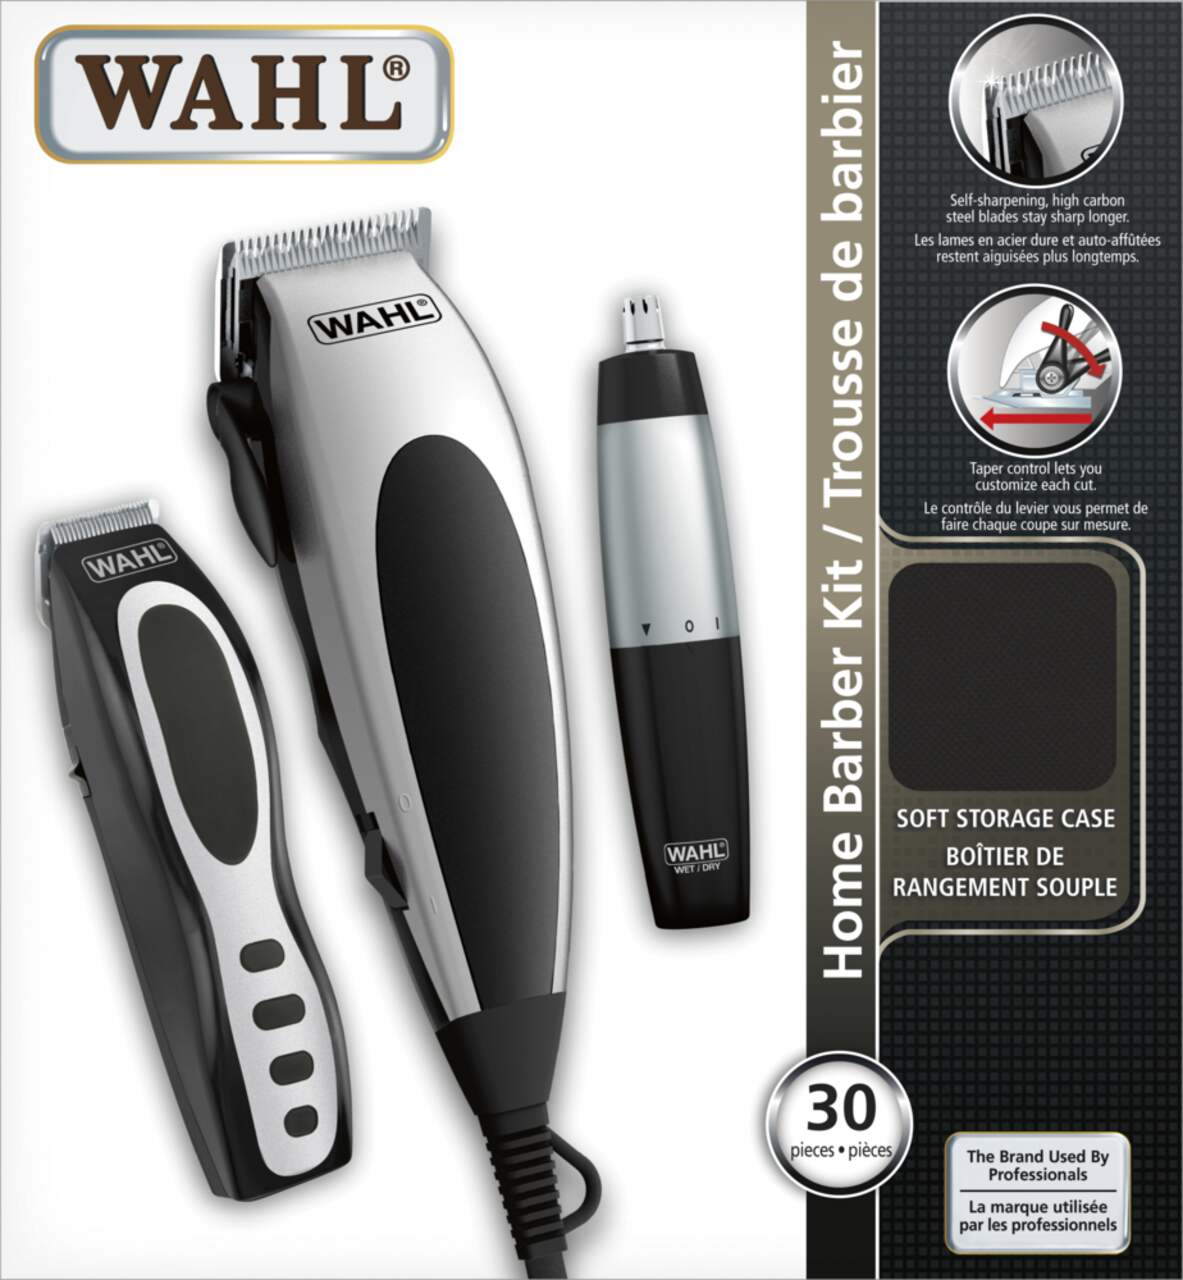 Wahl Home Barber Haircutting Kit with Clippers, Ear/Nose/Brow